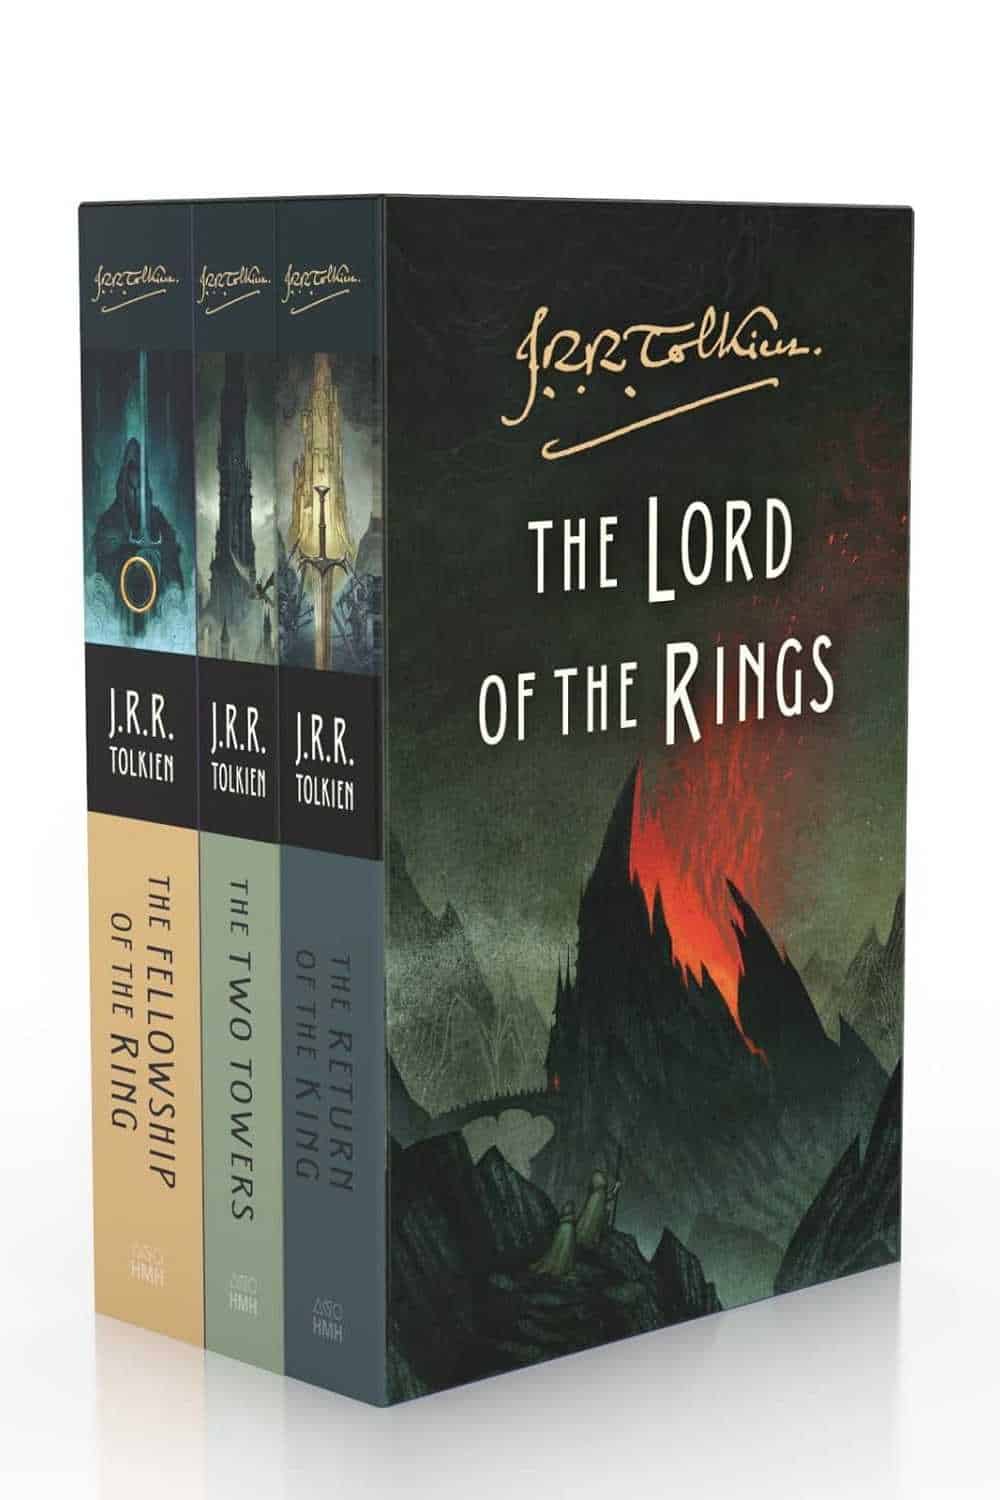 The Lord of the Rings Series by J.R.R. Tolkien